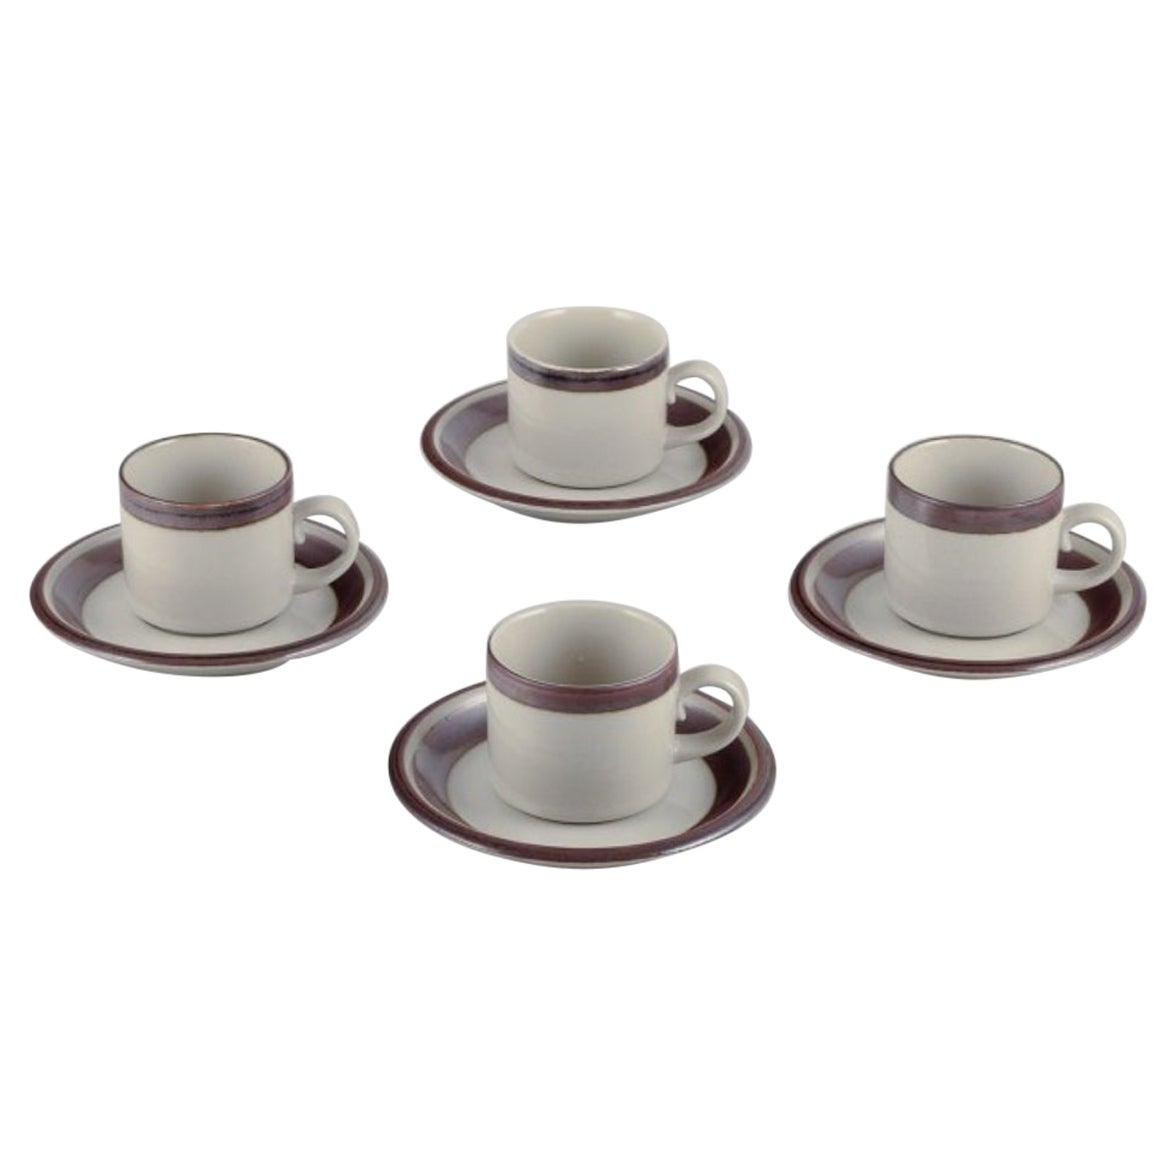 Arabia, Finland. "Karelia". Four sets of small coffee cups and saucers. For Sale